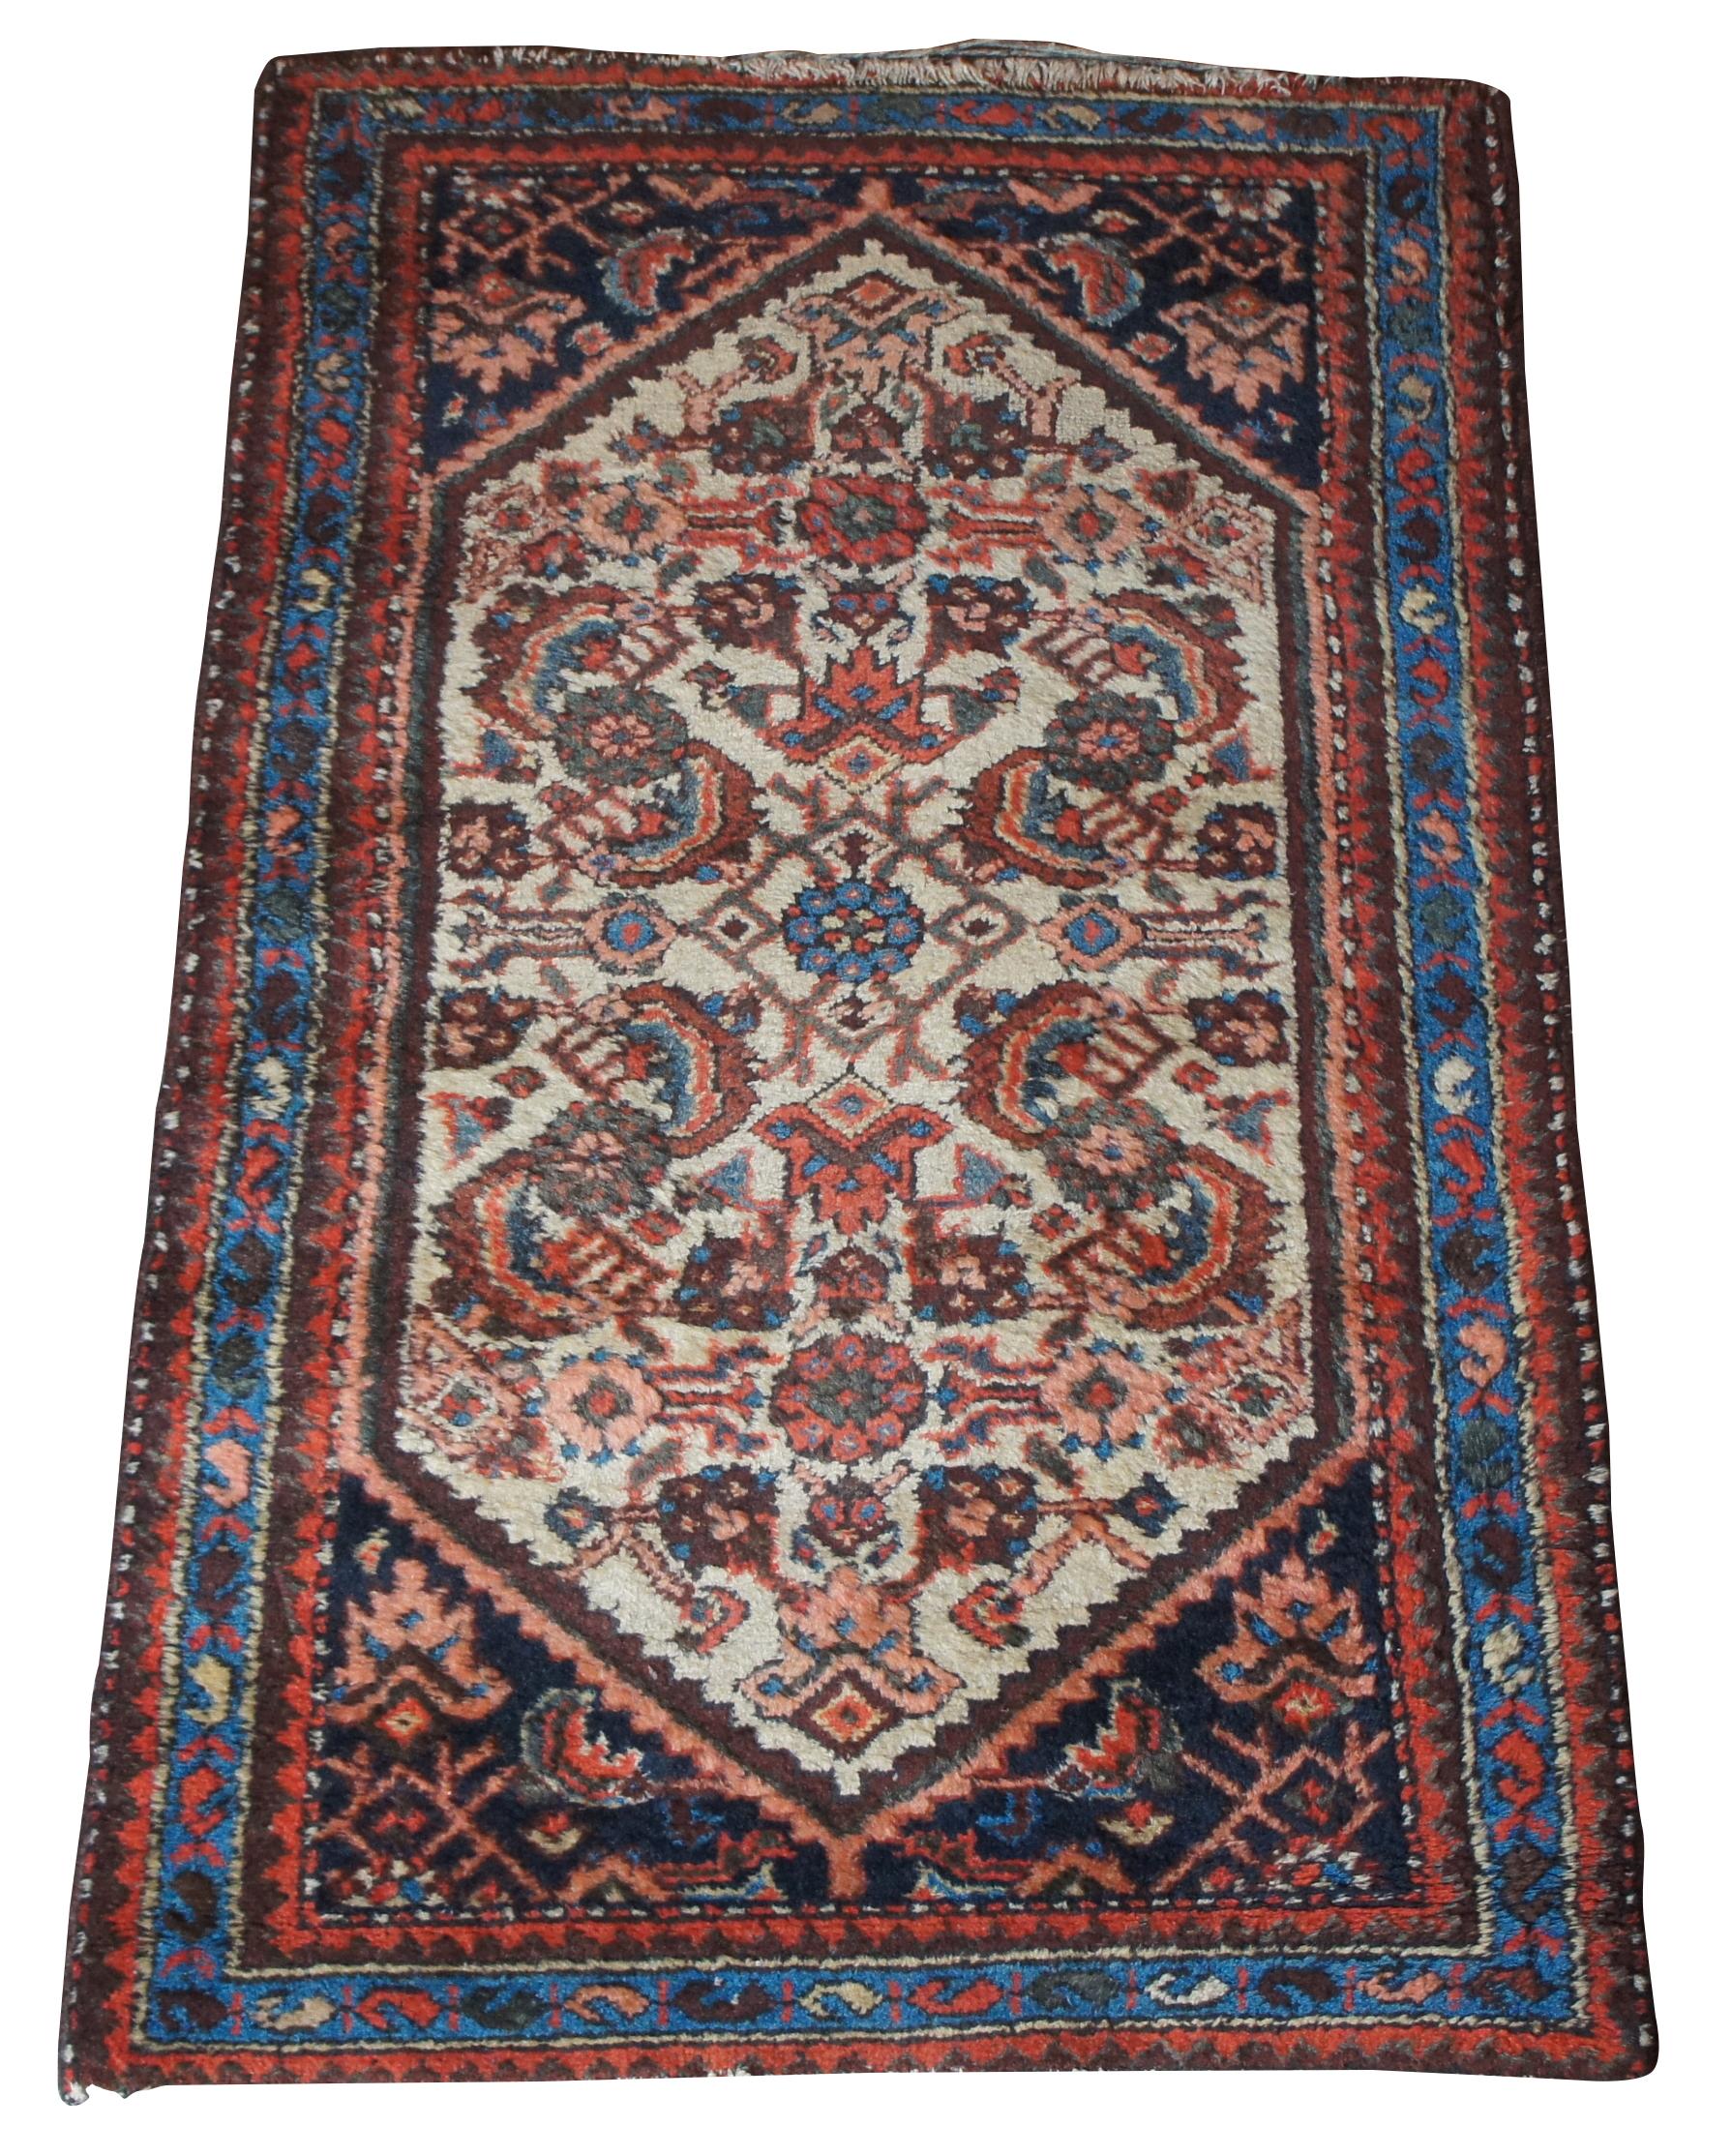 Semi antique hand knotted floral rug or mat. Made of wool featuring a floral motif over a tan field with geometric designs along the boarder. Pinks, blues, reds and tans. Made in Iran. Measure: 48